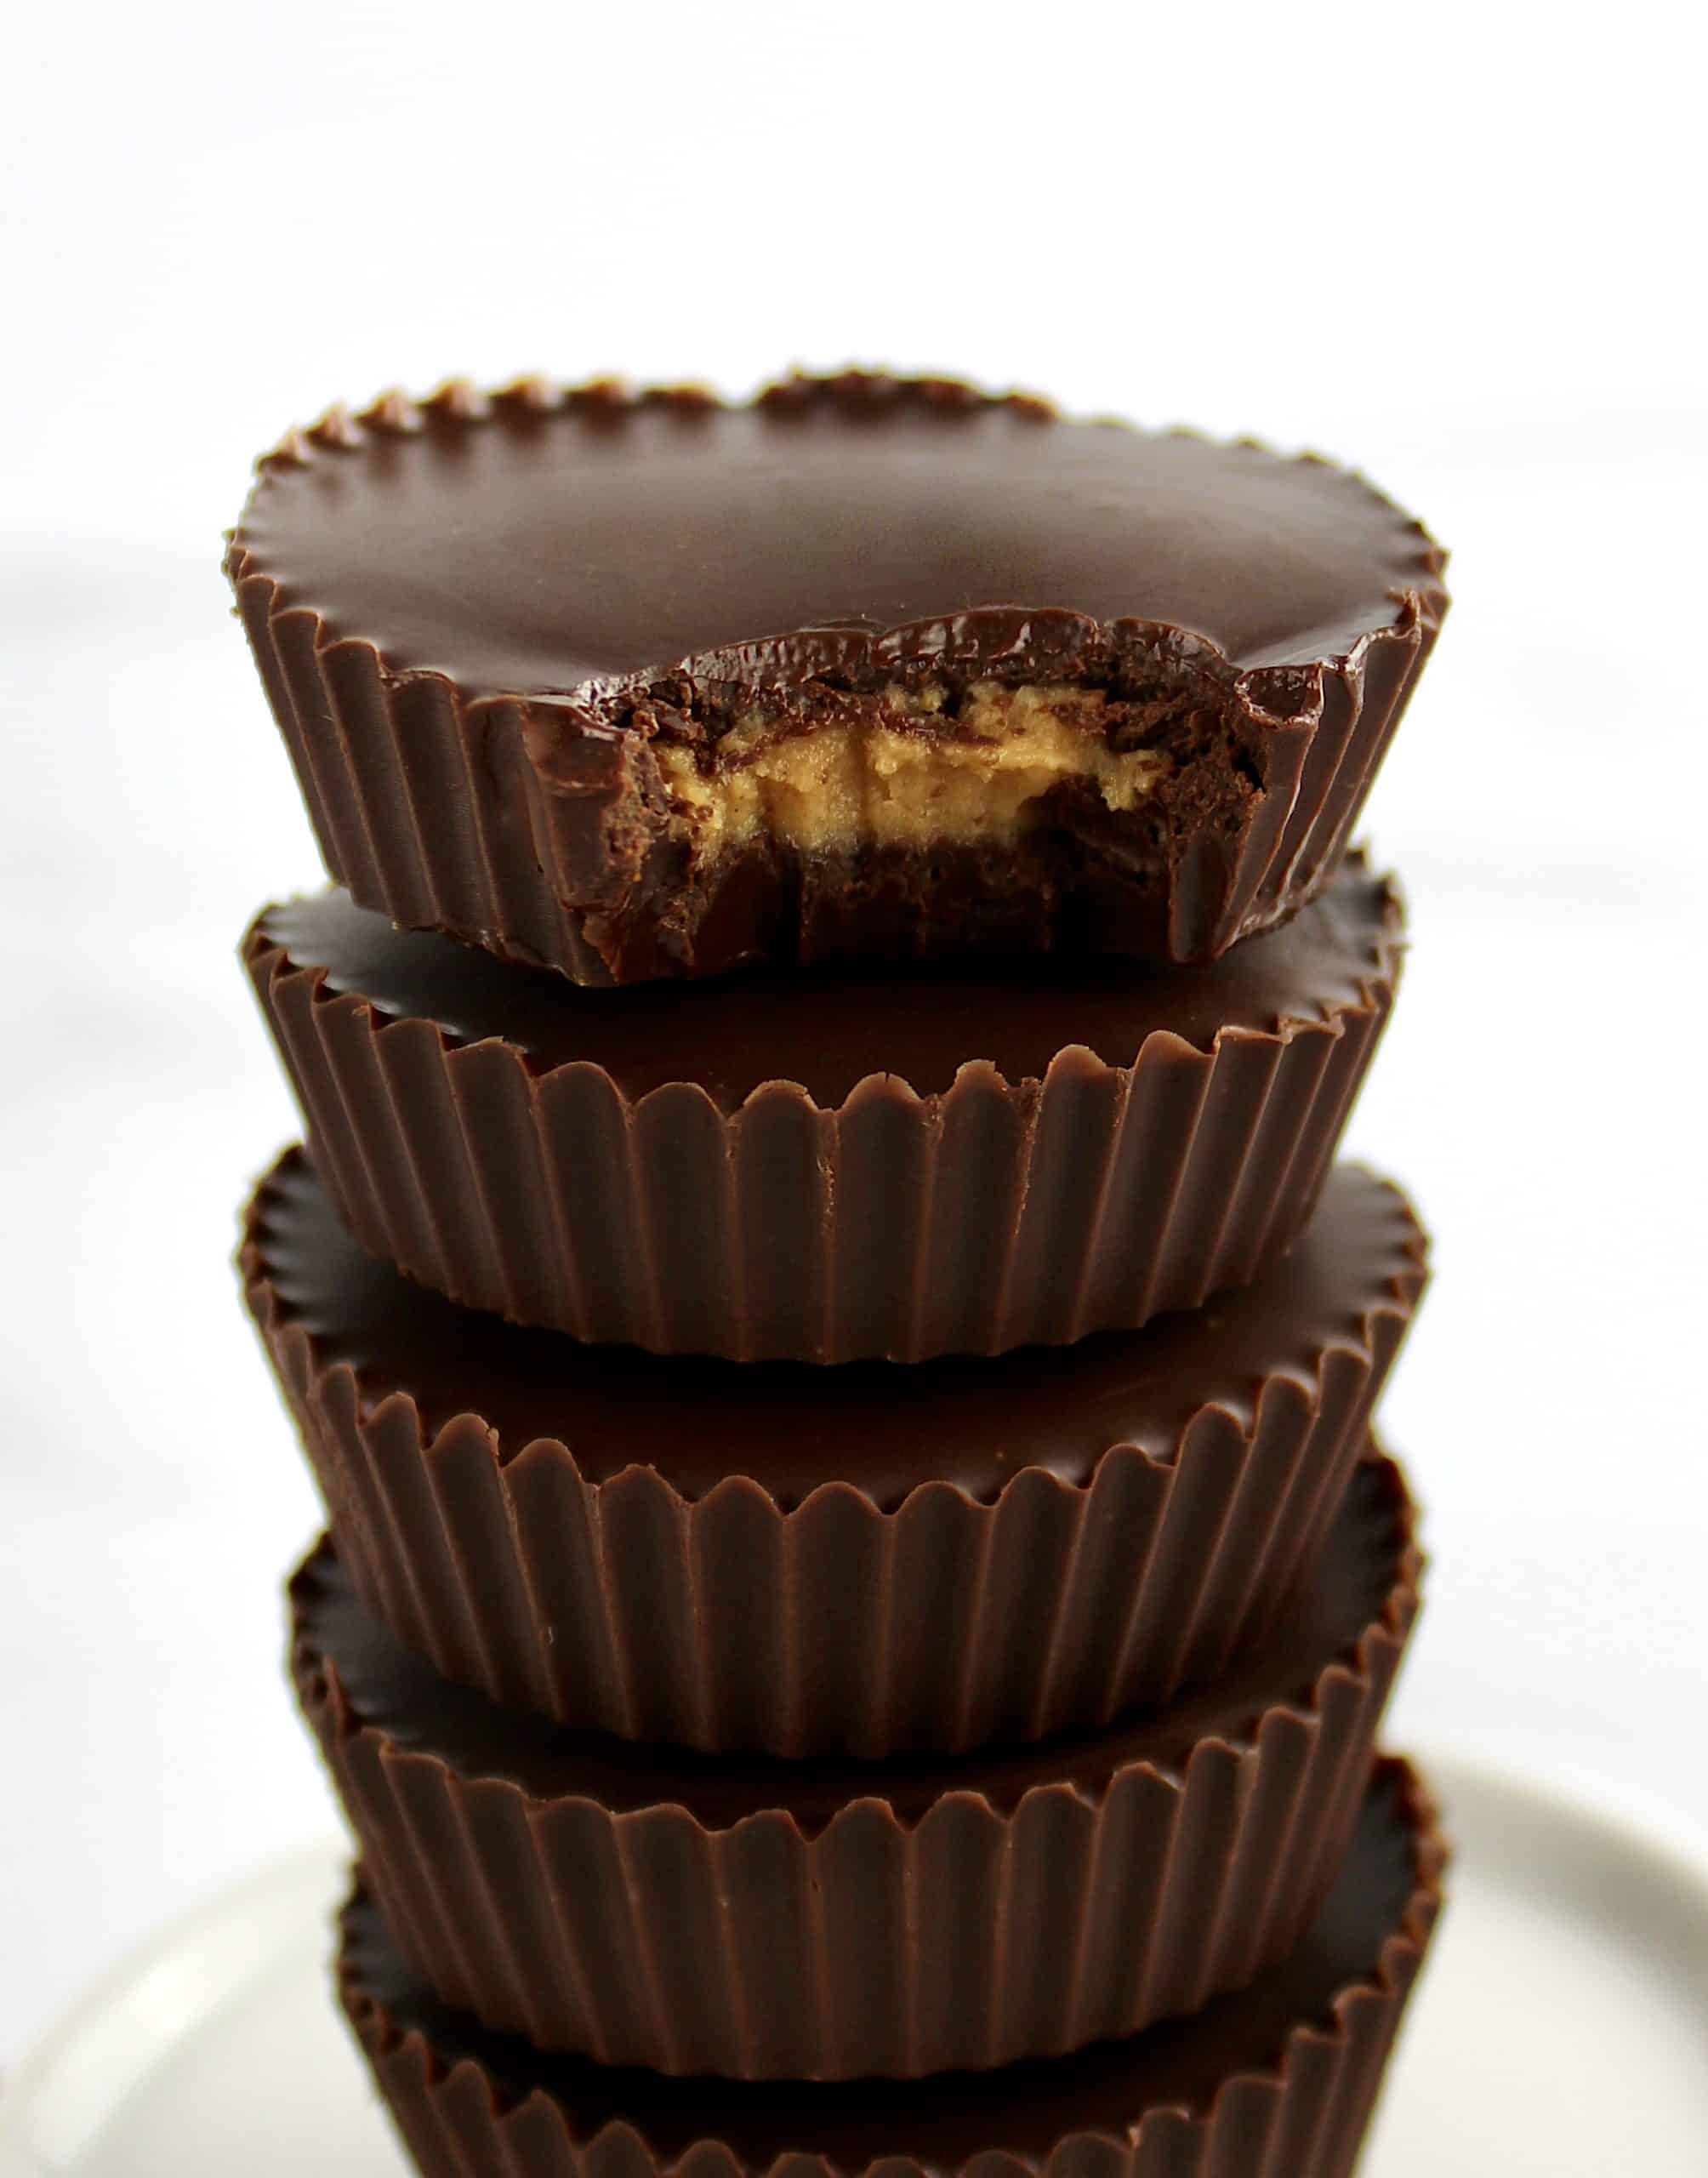 Keto Peanut Butter Cups stacked with bite missing from the top one